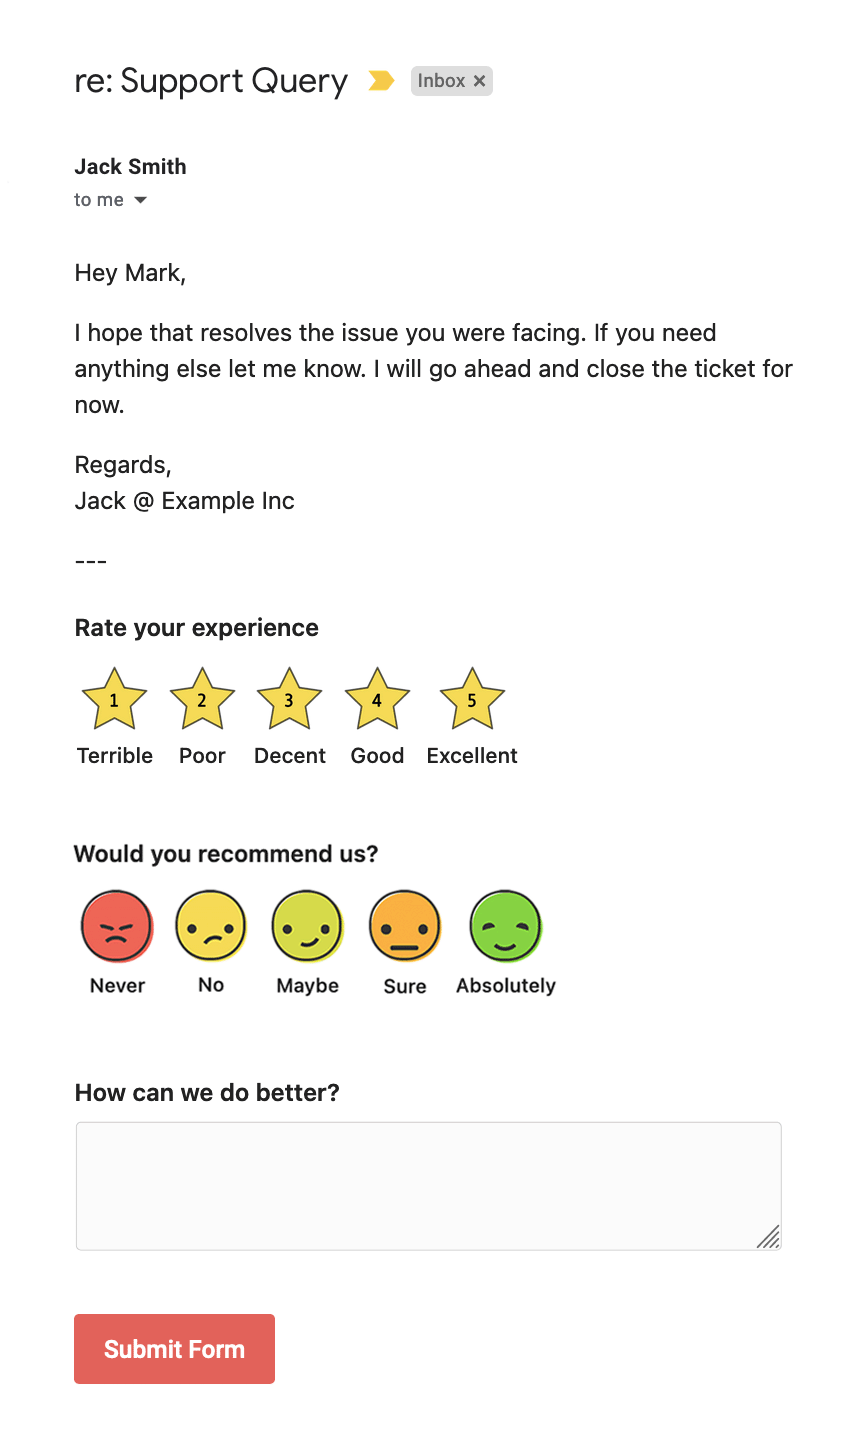 Embed feedback forms directly in emails